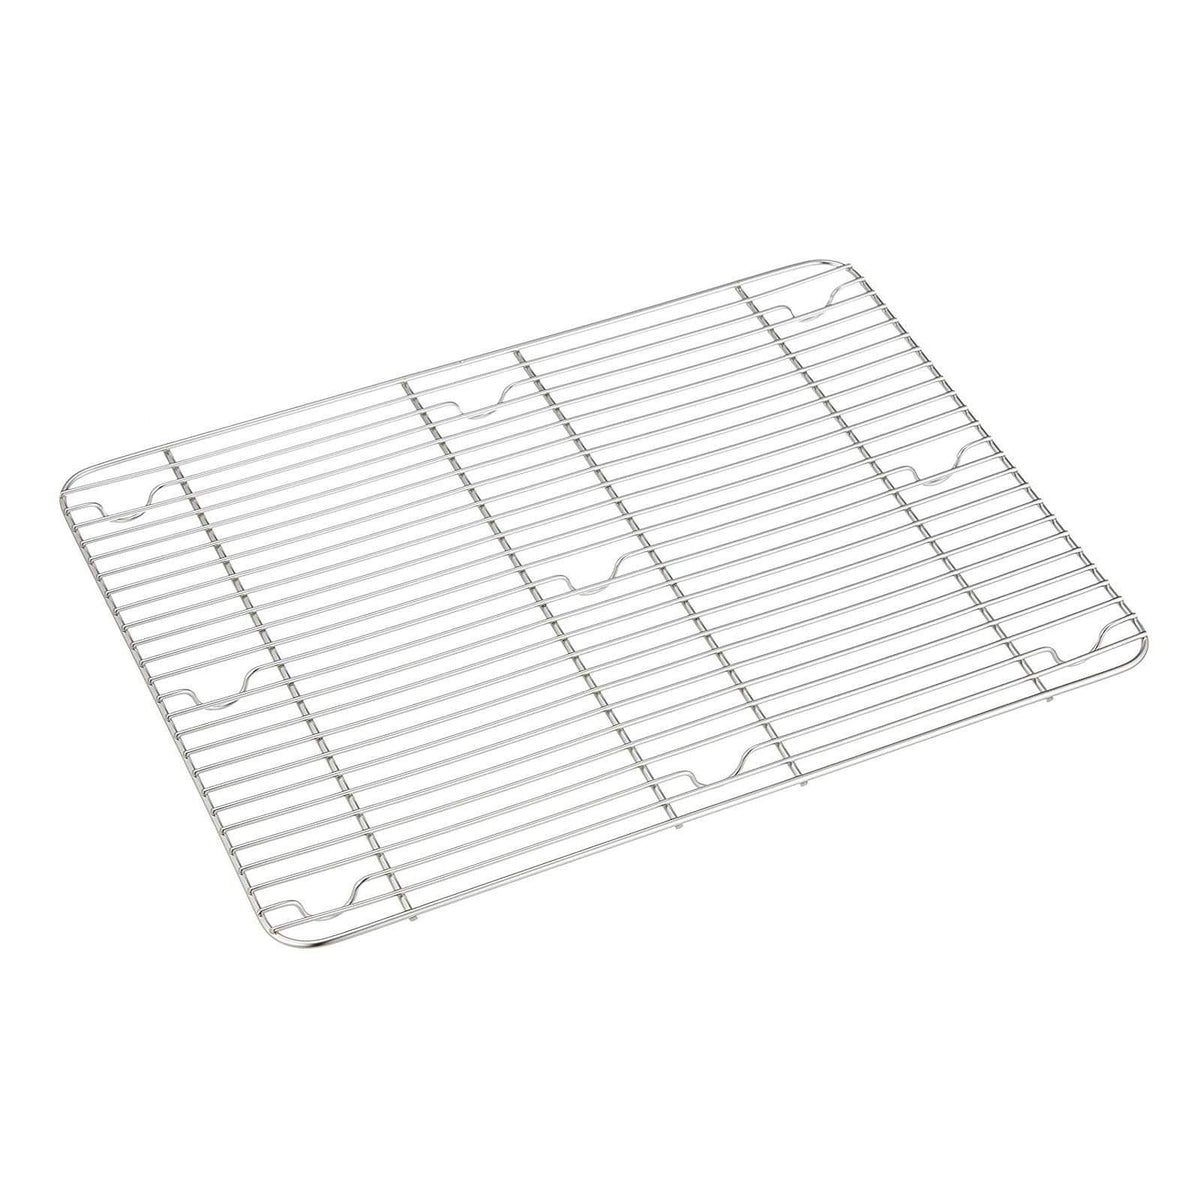 Ikeda Ecoclean Square Mesh Bat Pitch Width 6 mm (9 Sizes) No.5 (284x212mm) Cooling rack